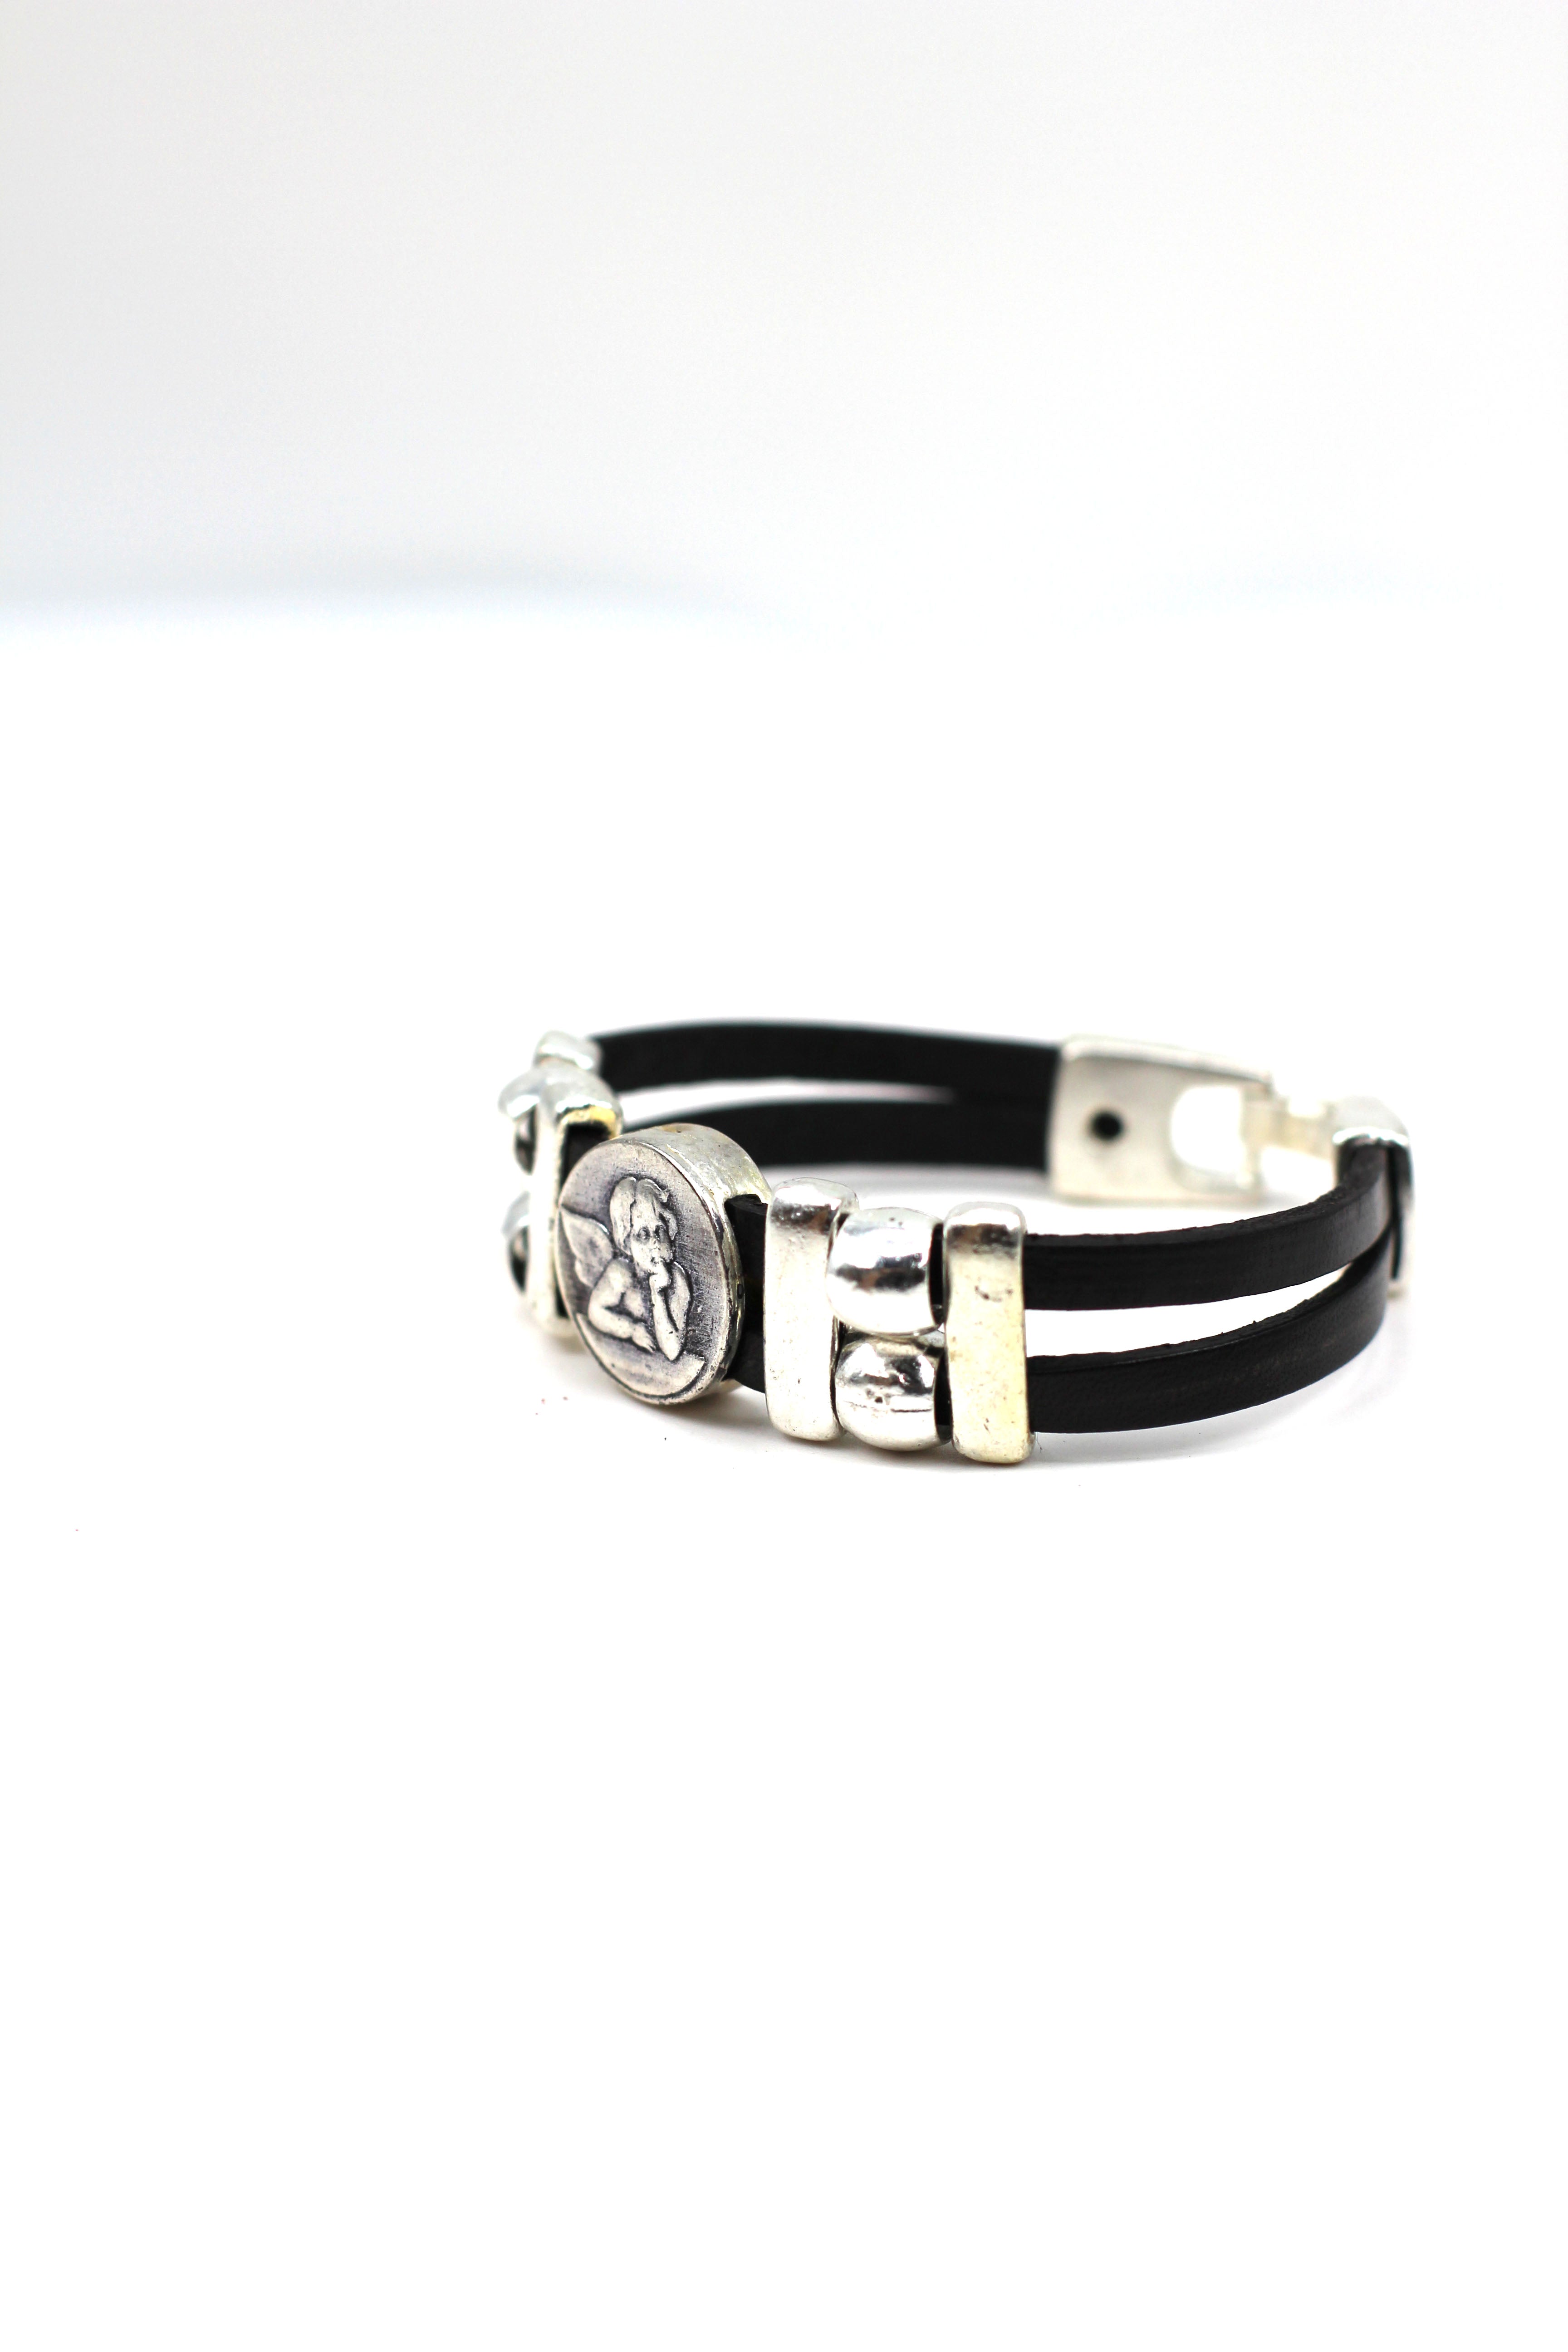 Bracelet of The Guardian Angel  handmade jewelry with Double Leather Straps by Graciela's Collection